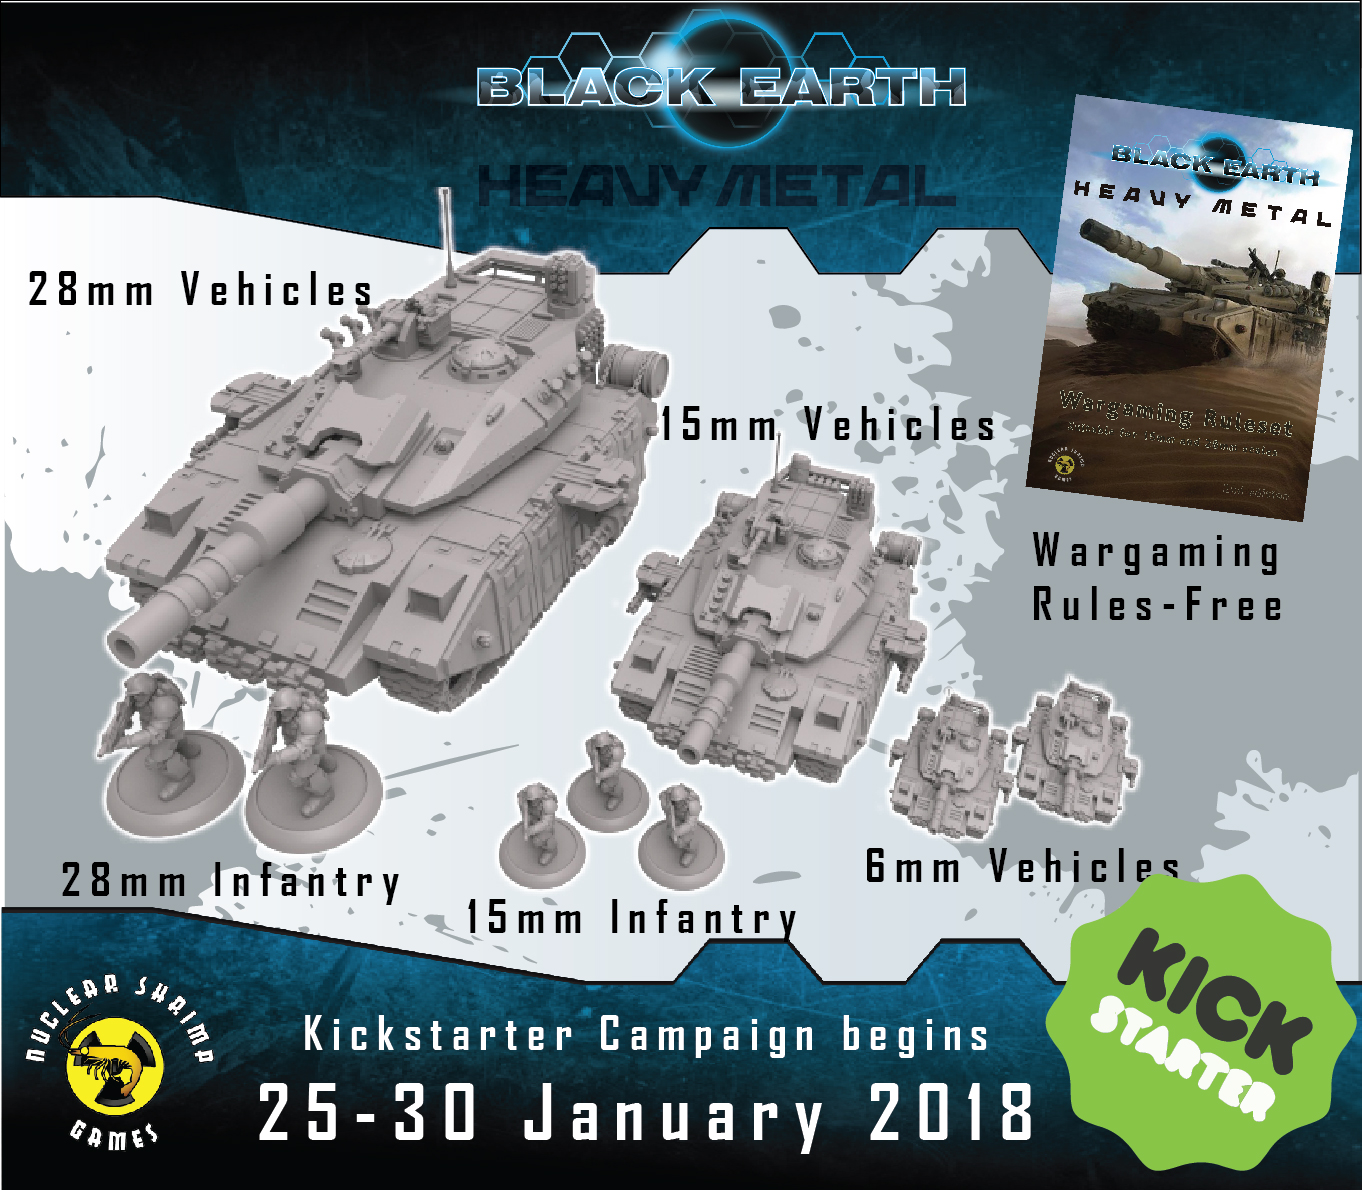 Black Earth : Heavy Metal kickstarter campaign launches on 25-30 January 2018